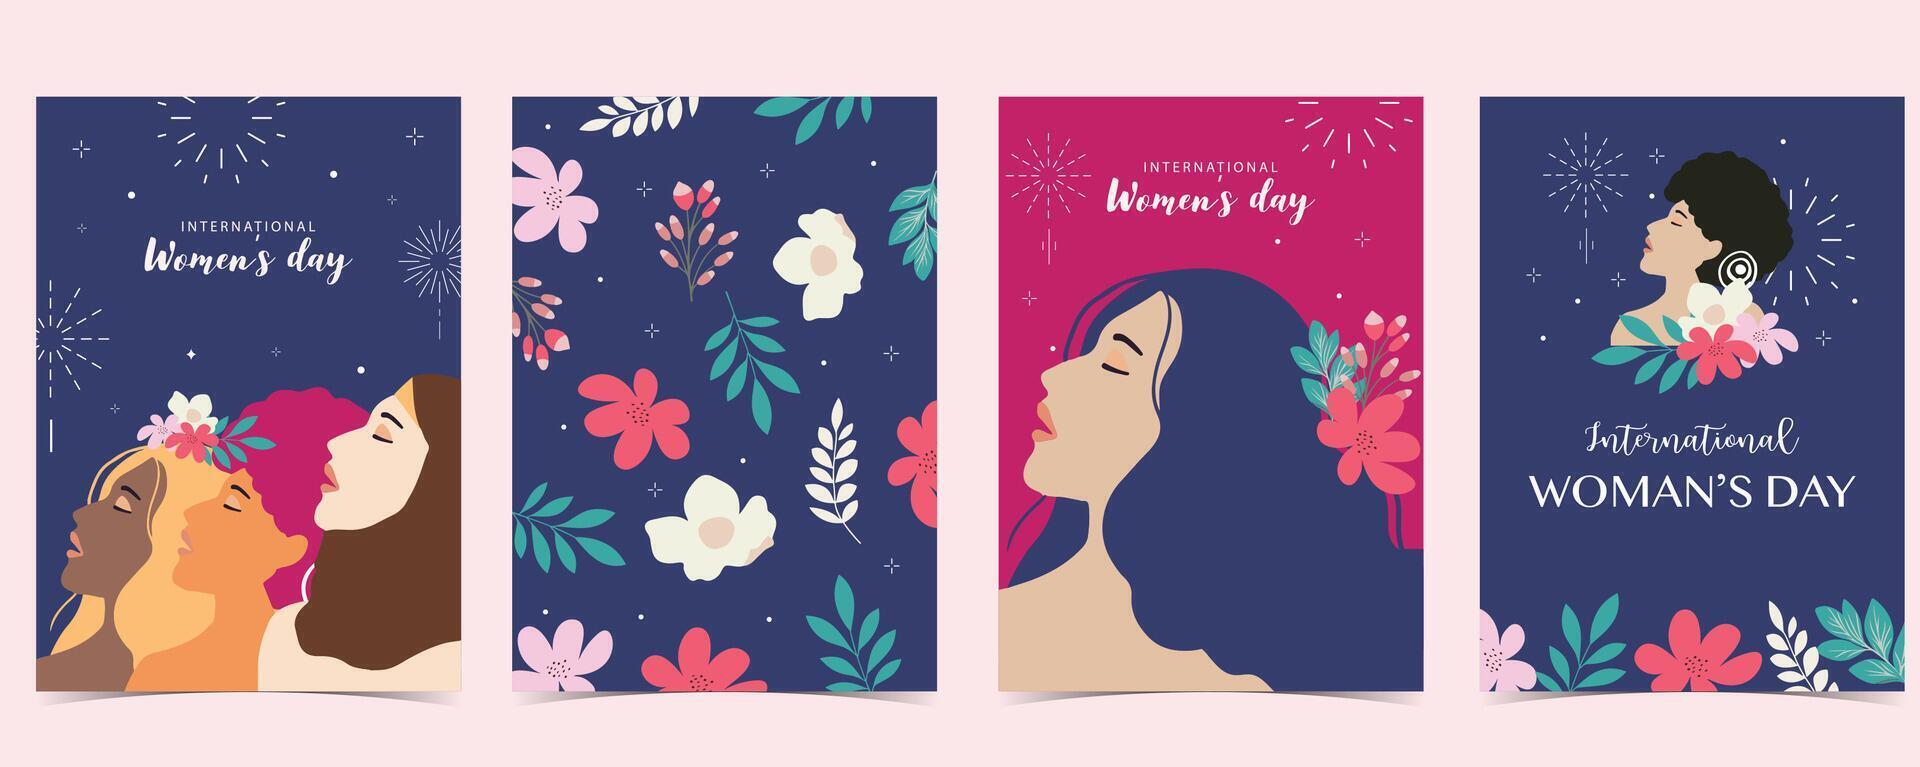 woman international day background with face,hair,hand and flower for A4 vertical size vector